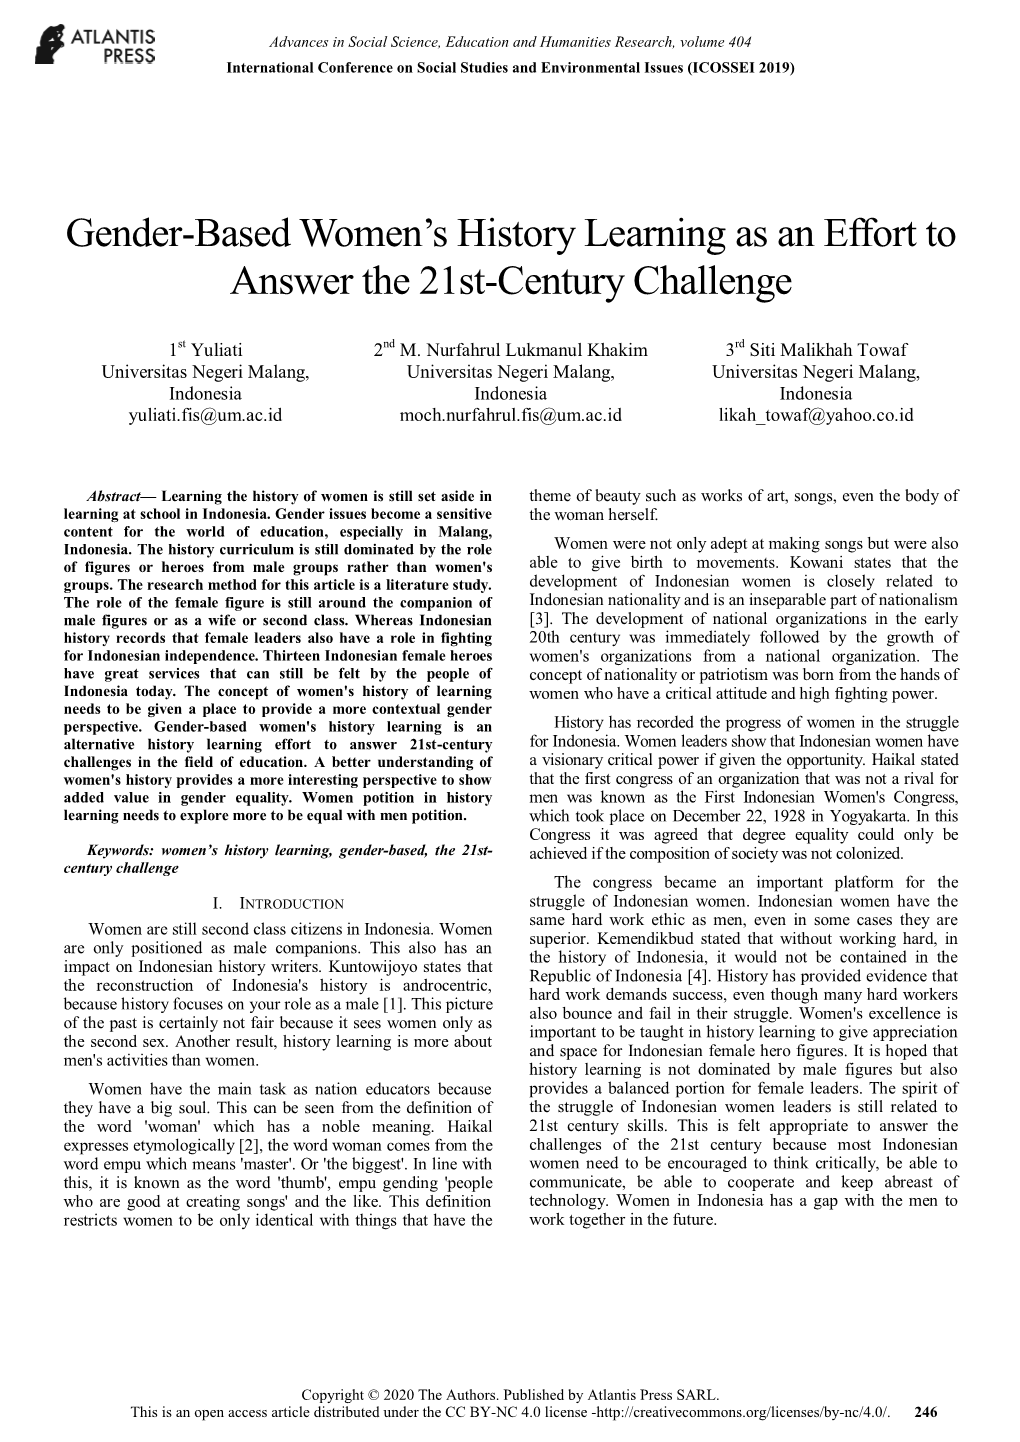 Gender-Based Women's History Learning As an Effort to Answer The